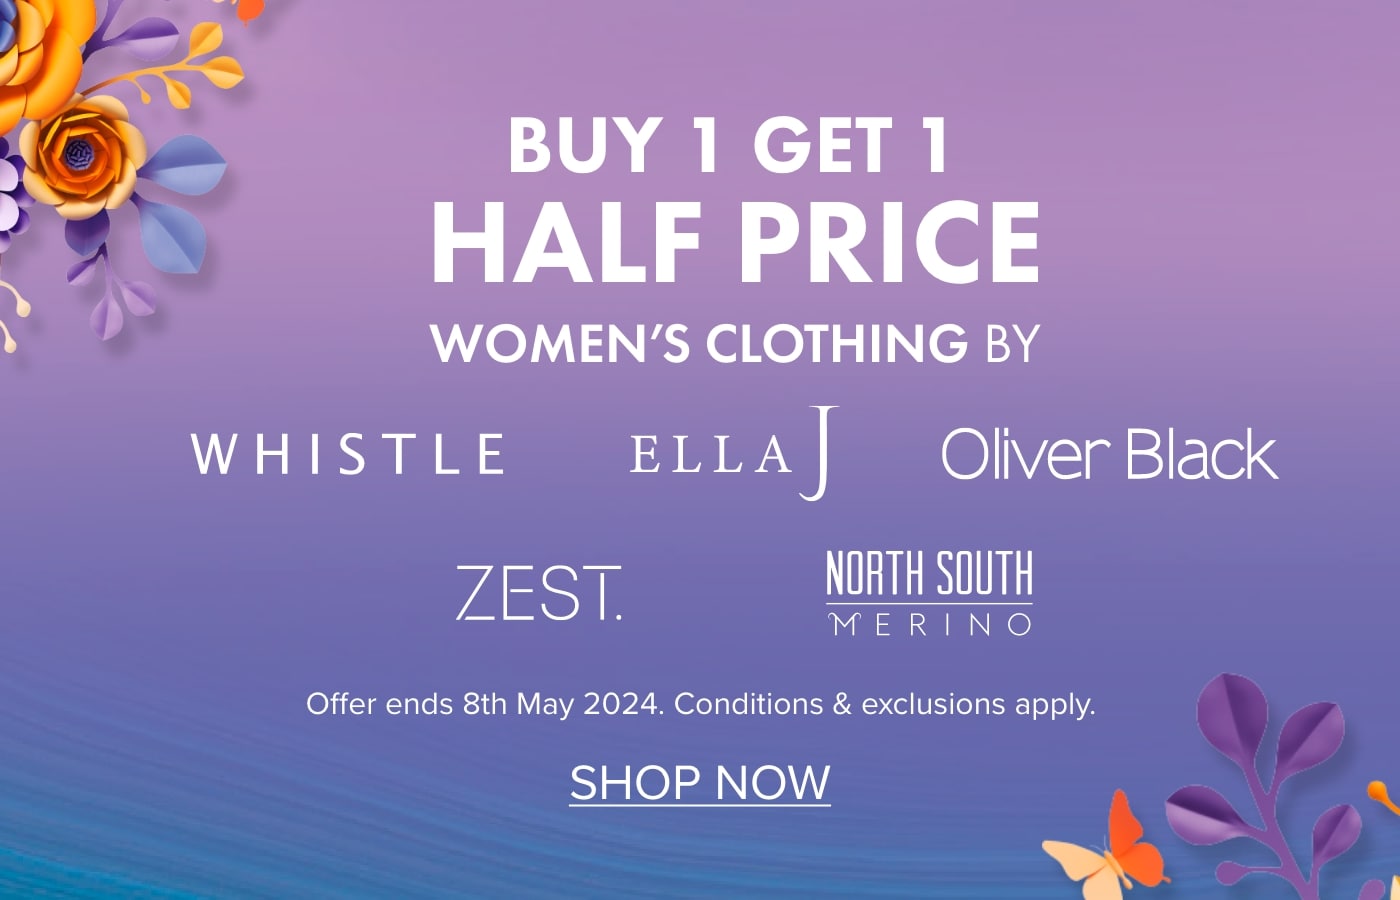 BUY 1 GET 1 HALF PRICE on Women's Clothing by Whistle, Ella J, Zest, Oliver Black, North South Merino